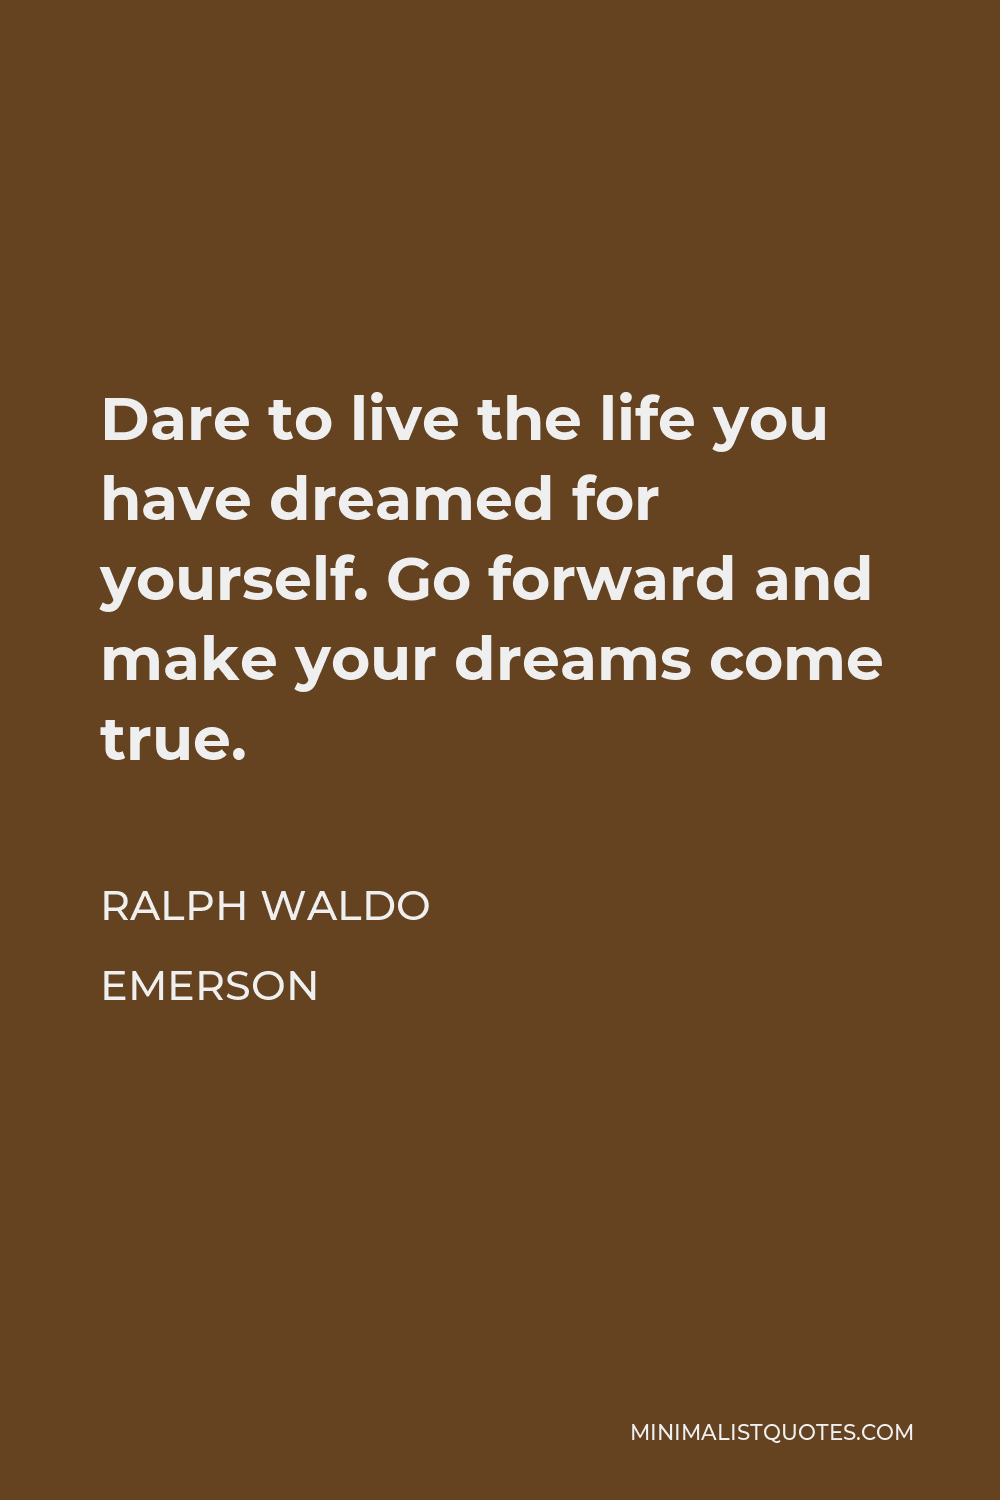 Ralph Waldo Emerson Quote - Dare to live the life you have dreamed for yourself. Go forward and make your dreams come true.